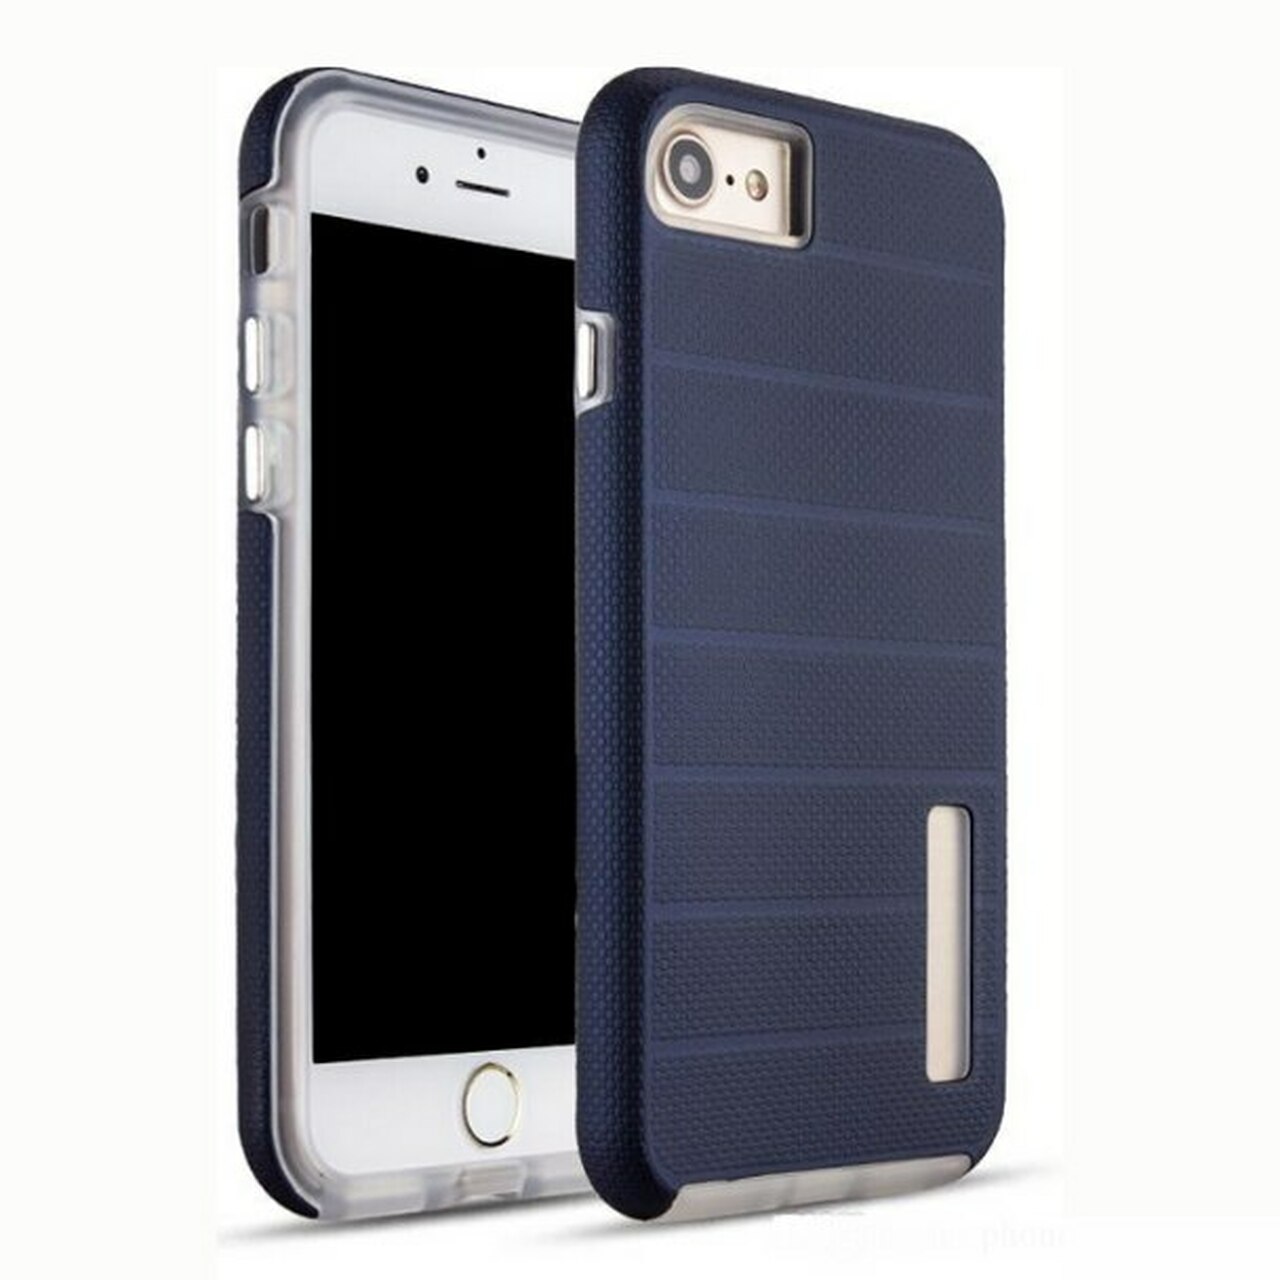 Caseology Hard Shell Fashion Case for iPhone 6 / iPhone 6s